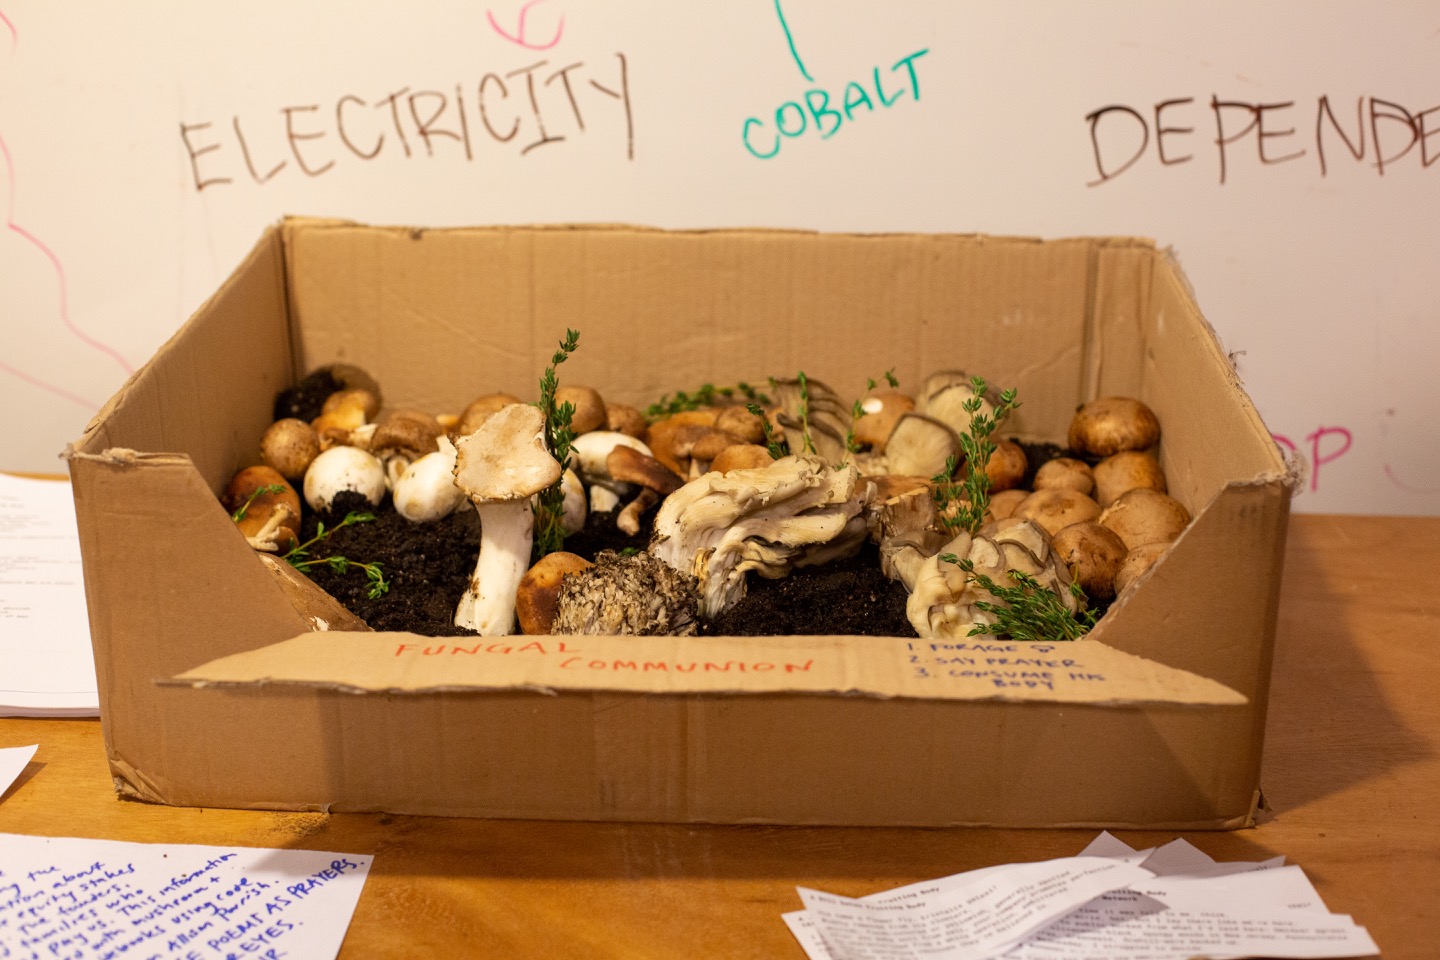 "Box of various mushrooms ready for use in fungal communion."